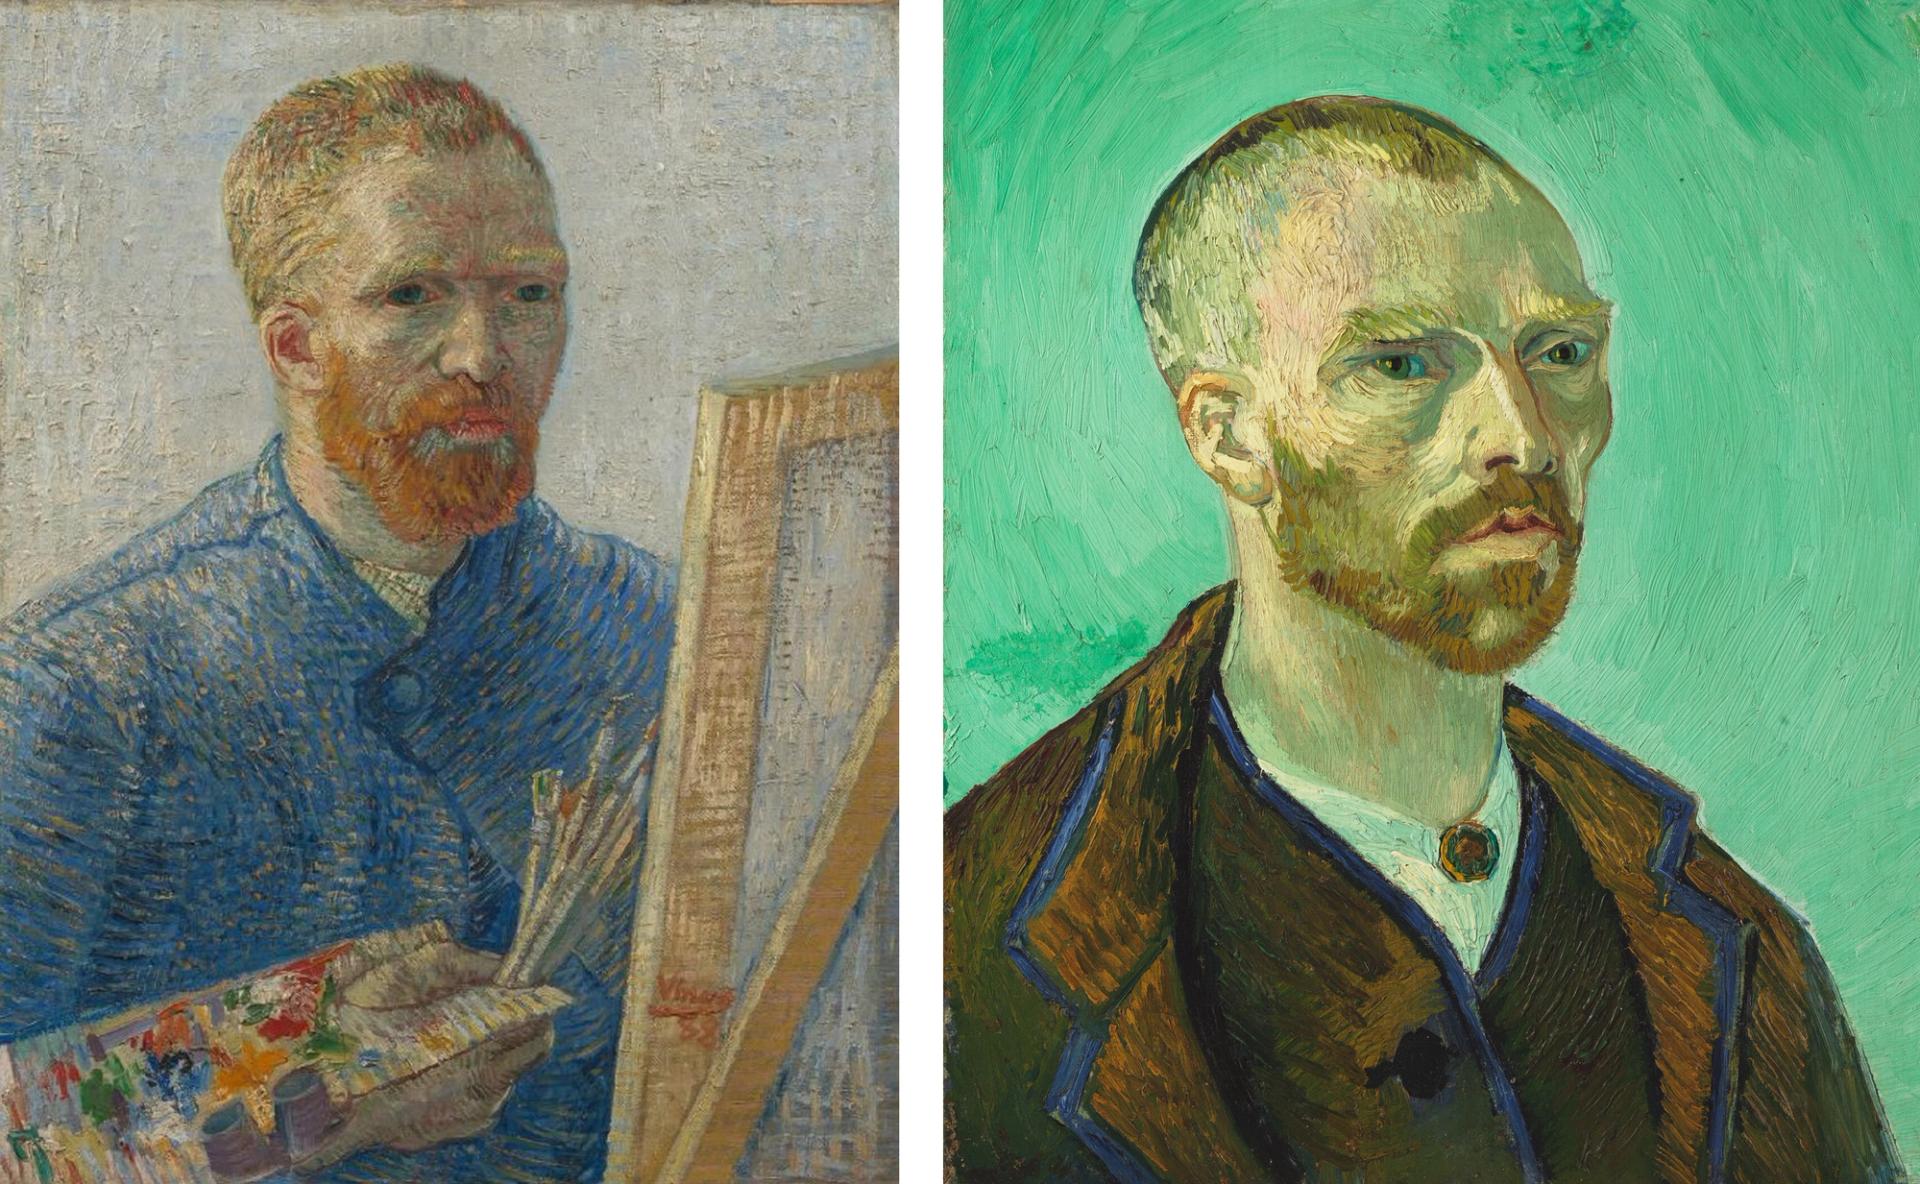 Not a fake: Van Gogh self-portrait is his only work painted while